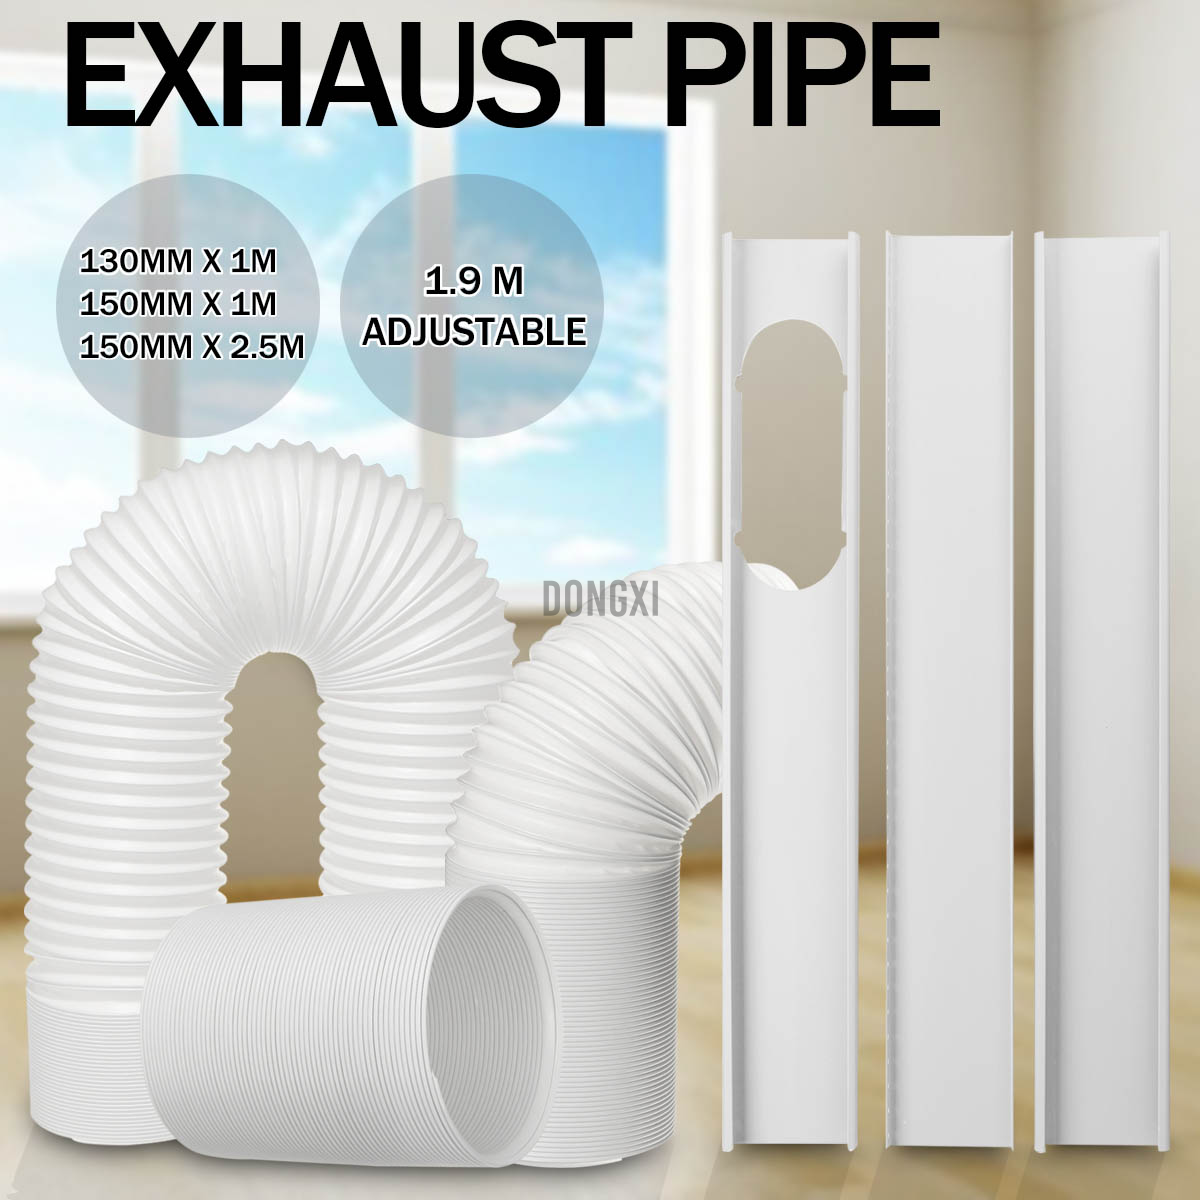 2.5M/1M Flexible Air Conditioner Exhaust Pipe Vent Hose Duct Outlet 130/150mm